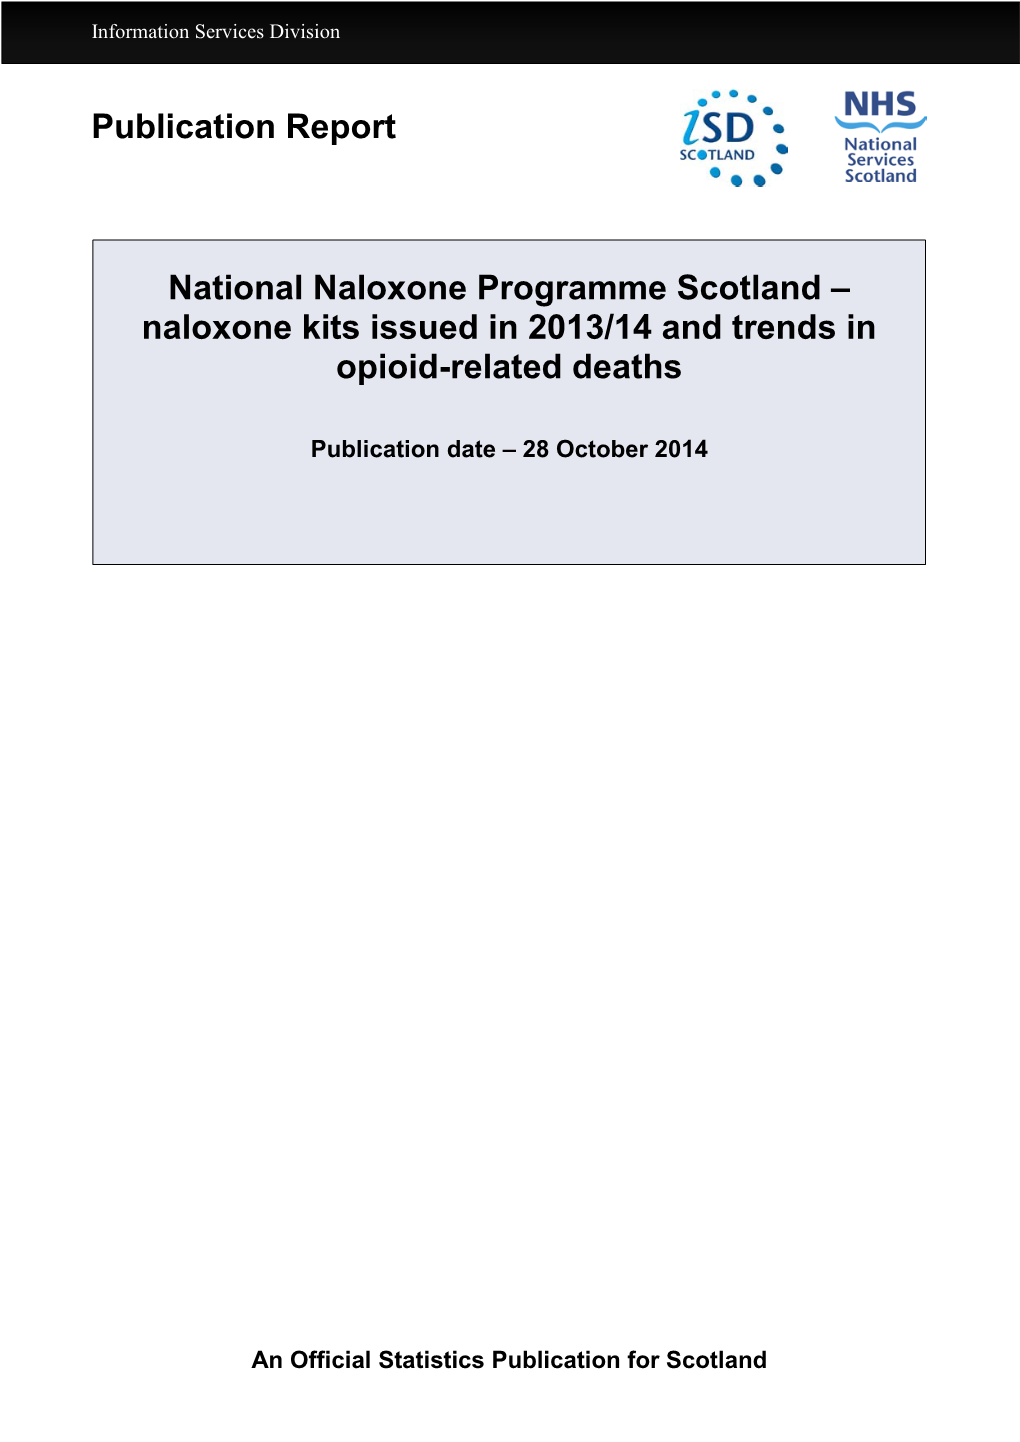 Naloxone Kits Issued in 2013/14 and Trends in Opioid-Related Deaths